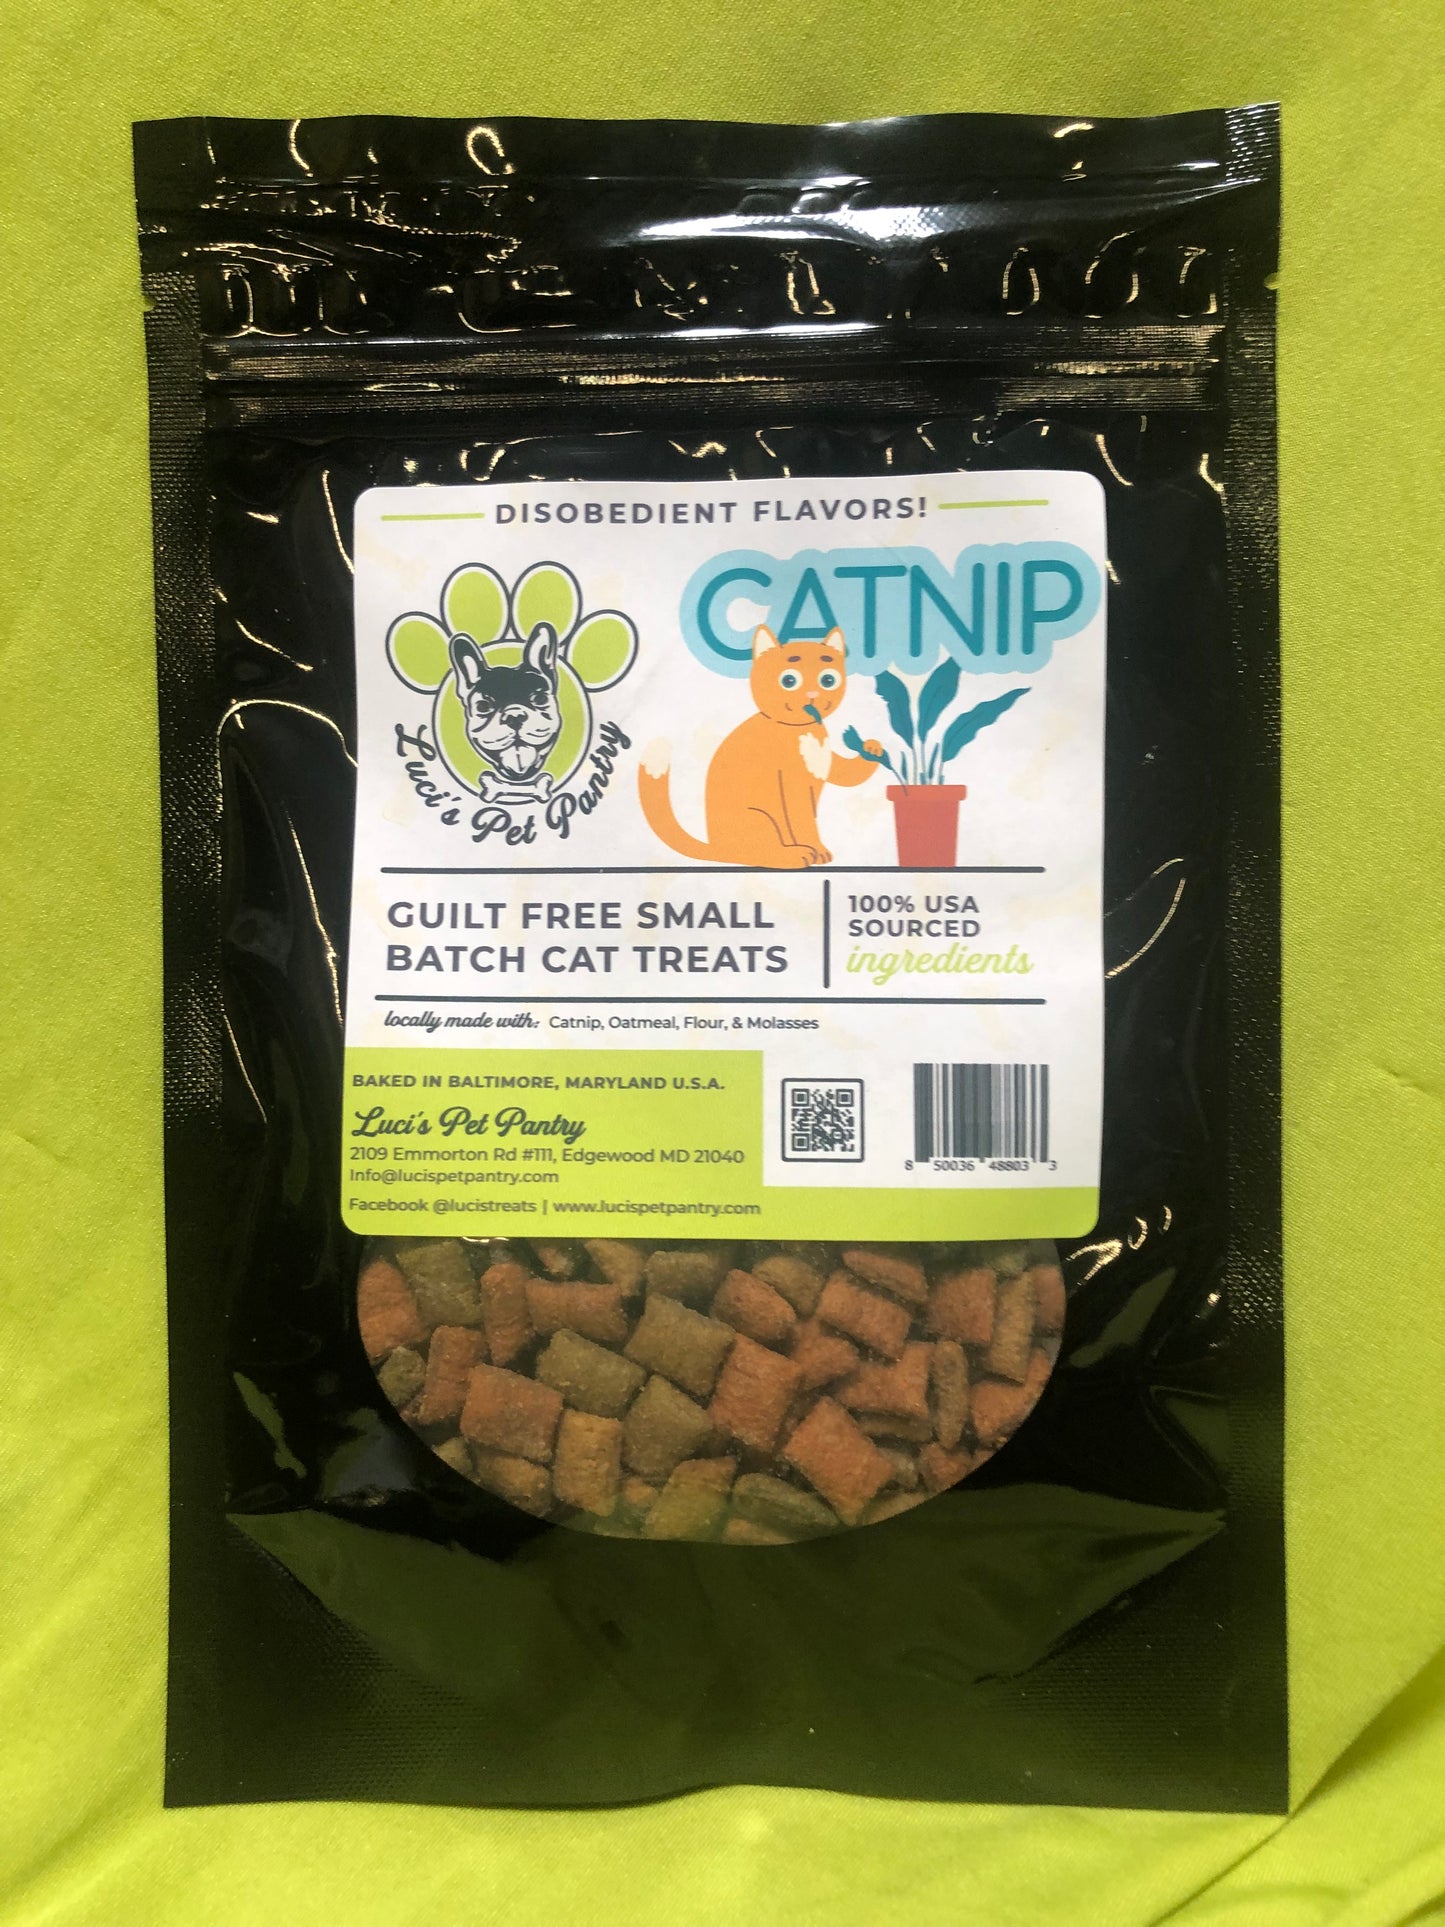 Beef - All Natural "Beef" Cat & Kitten Disobedient Treats - 2 oz. Pouch